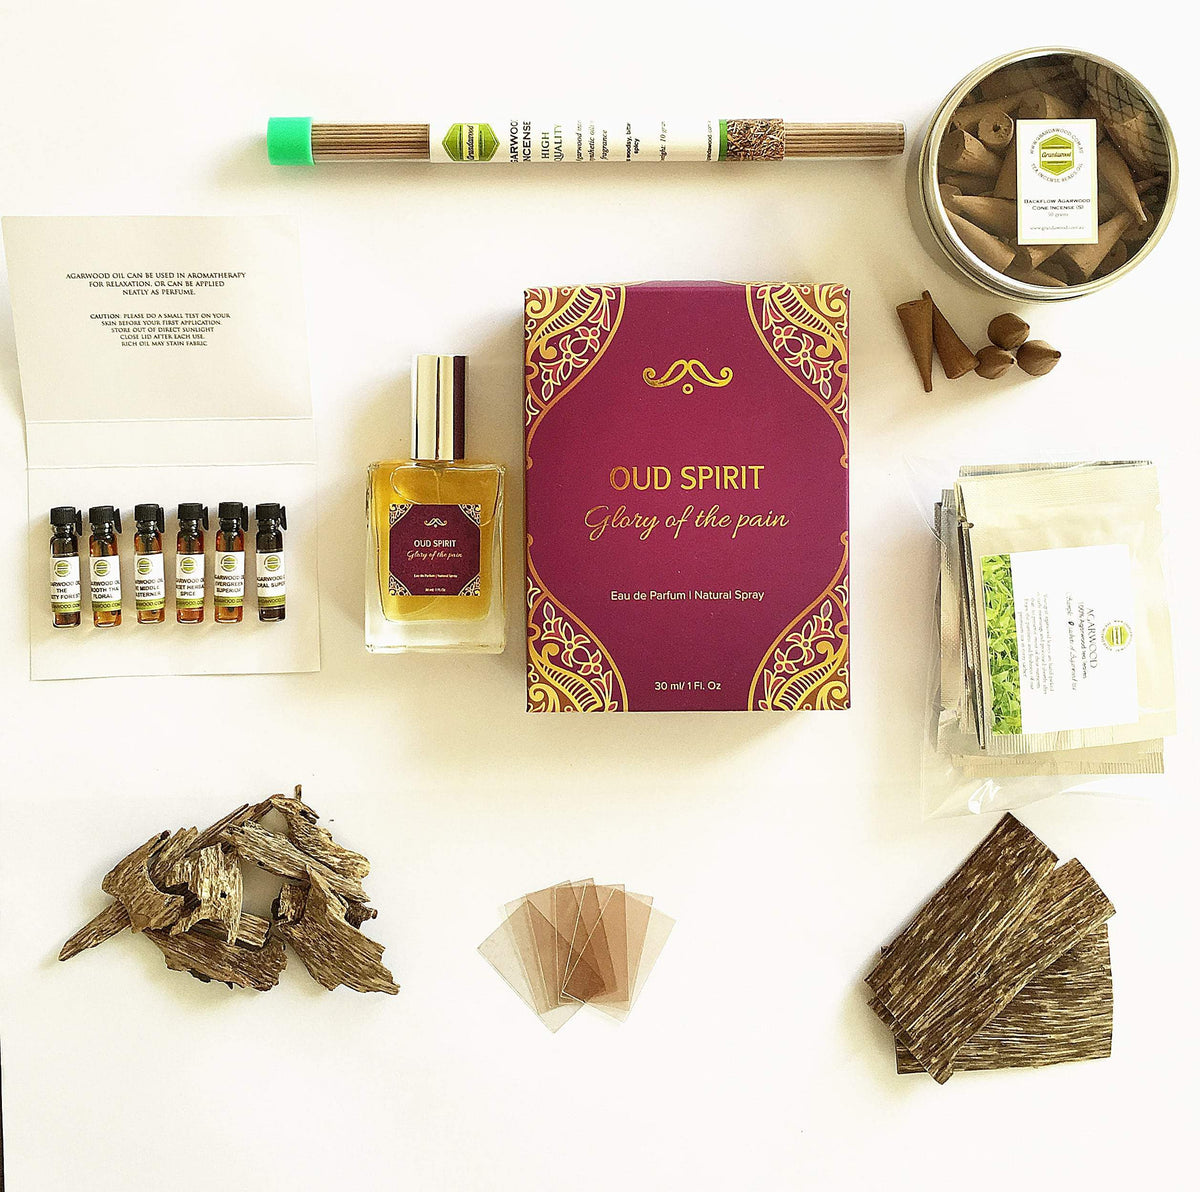 Gift sets: Super Valued Agarwood (Oud) Pack: oil, incenses, wood chips, perfume, and tea. -